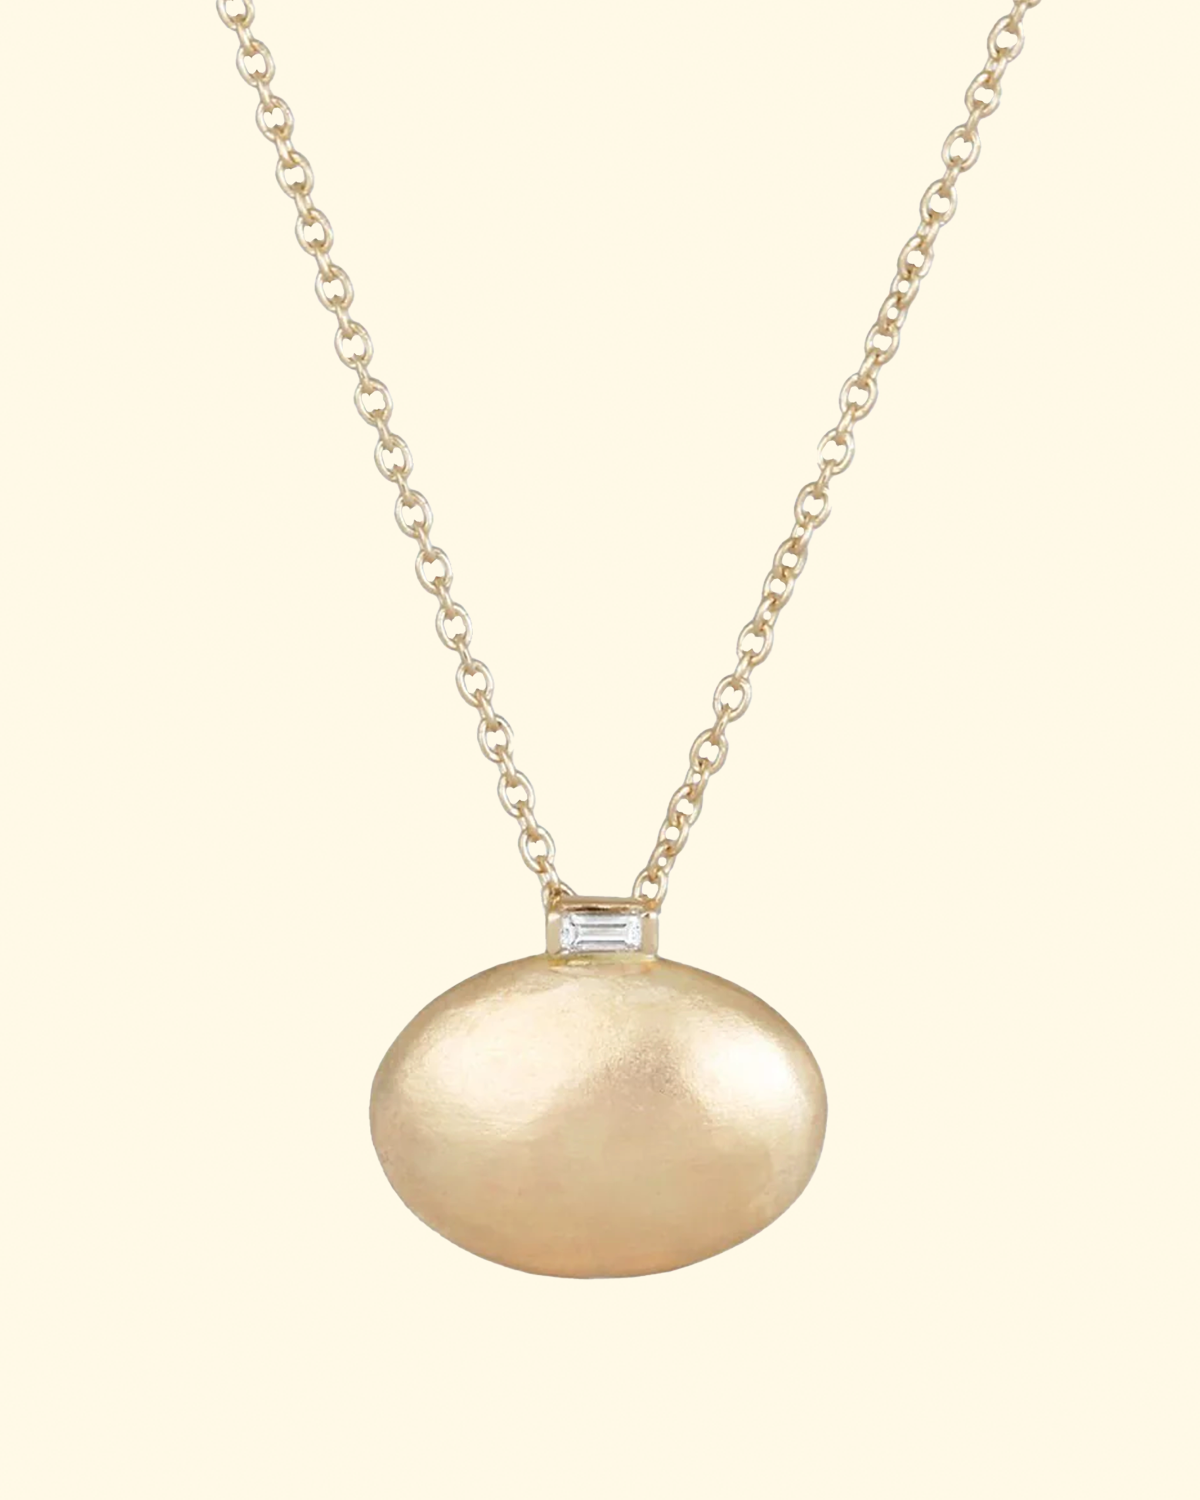 Large Oval Pendant with Diamond Baguette accent